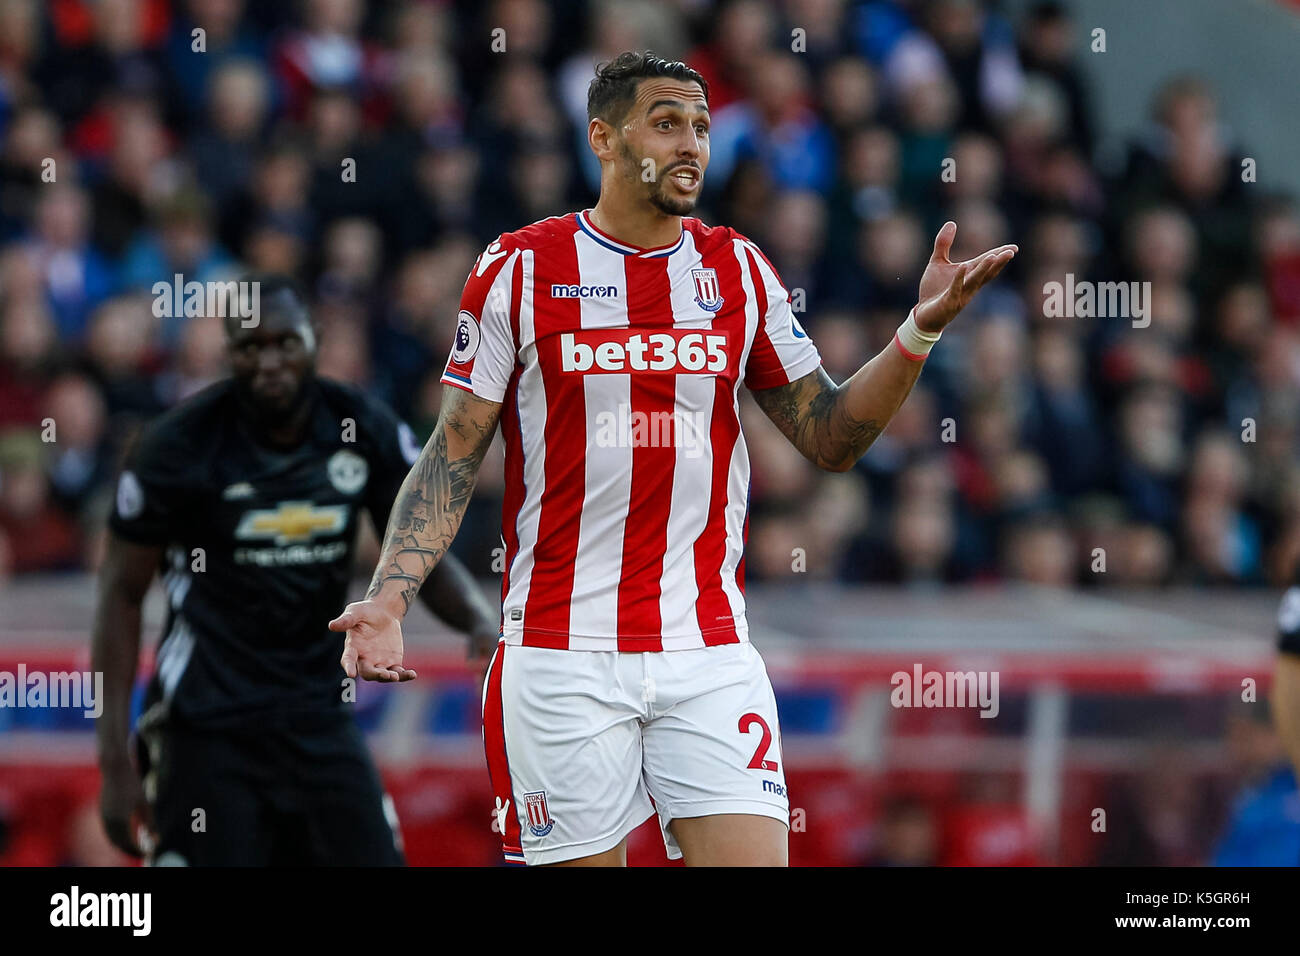 Stoke-on-Trent, UK. 9th September, 2017. Geoff Cameron of Stoke City during the Premier League match between Stoke City and Manchester United at Bet365 Stadium on September 9th 2017 in Stoke-on-Trent, England. Credit: PHC Images/Alamy Live News Stock Photo